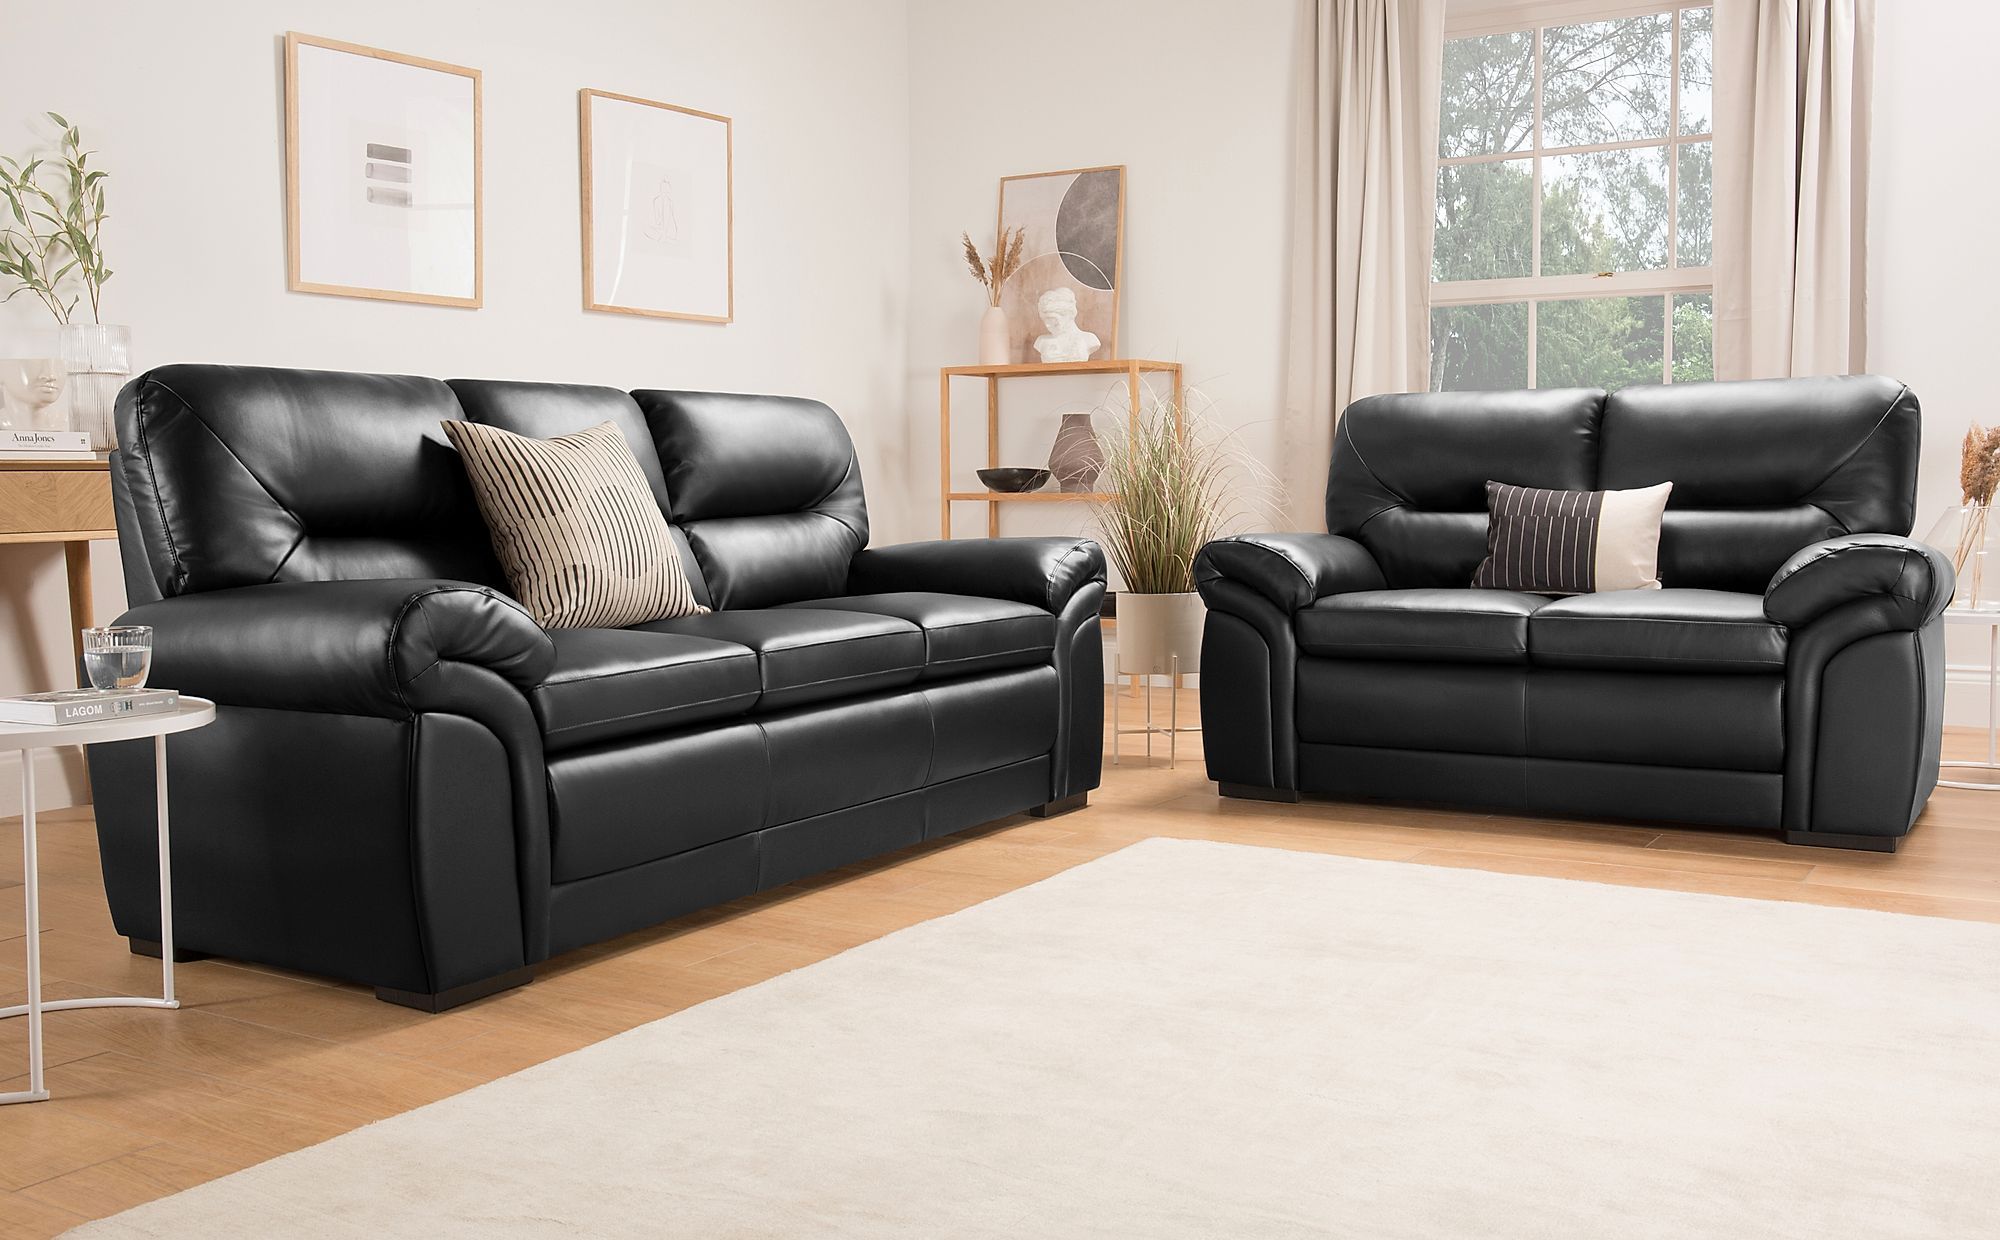 Bromley Black Leather 3+2 Seater Sofa Set | Furniture Choice In Sofas In Black (View 11 of 20)